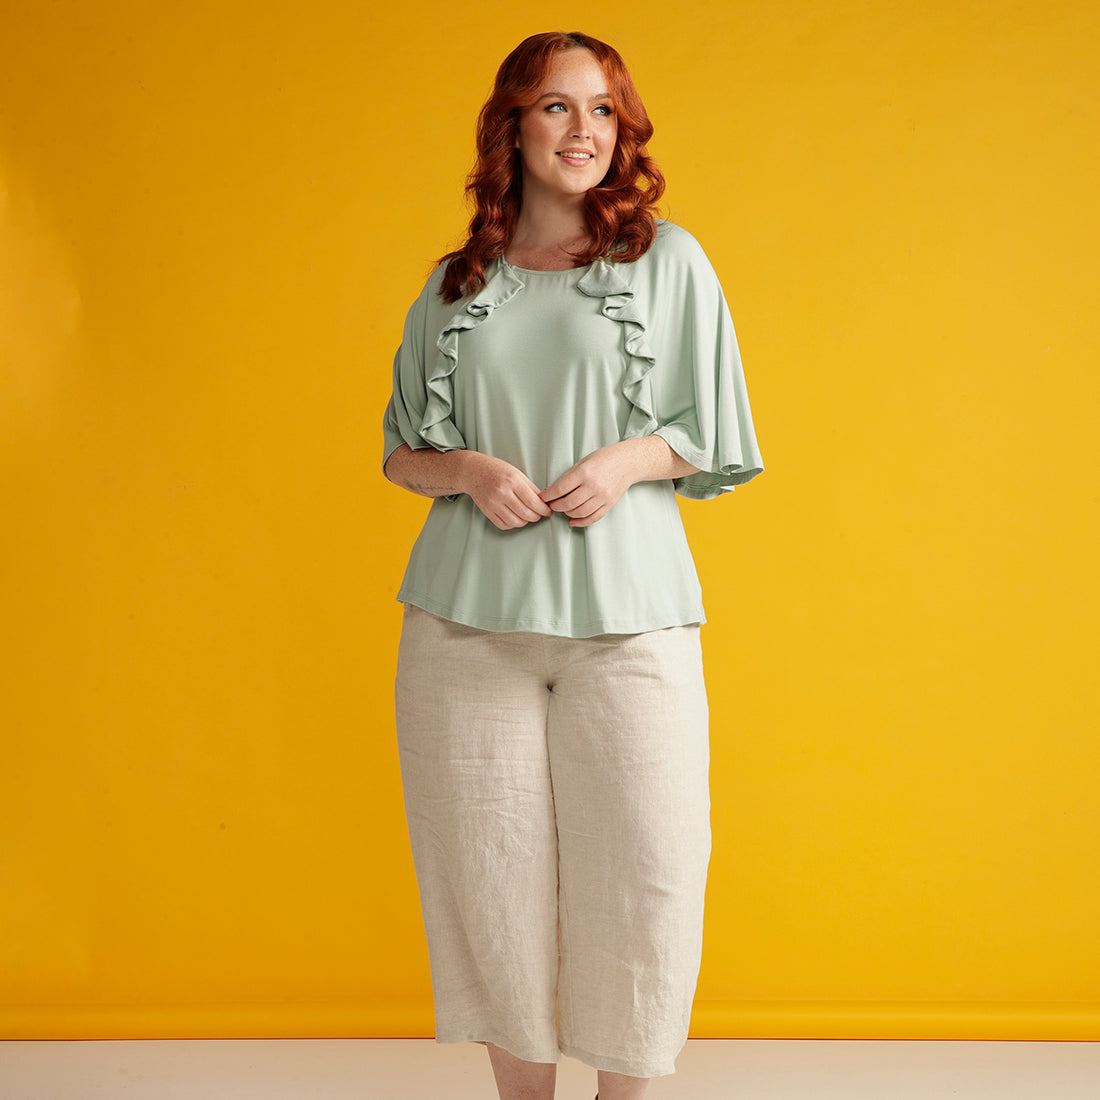 Plus sized woman in adaptive mint green top with ruffle detail